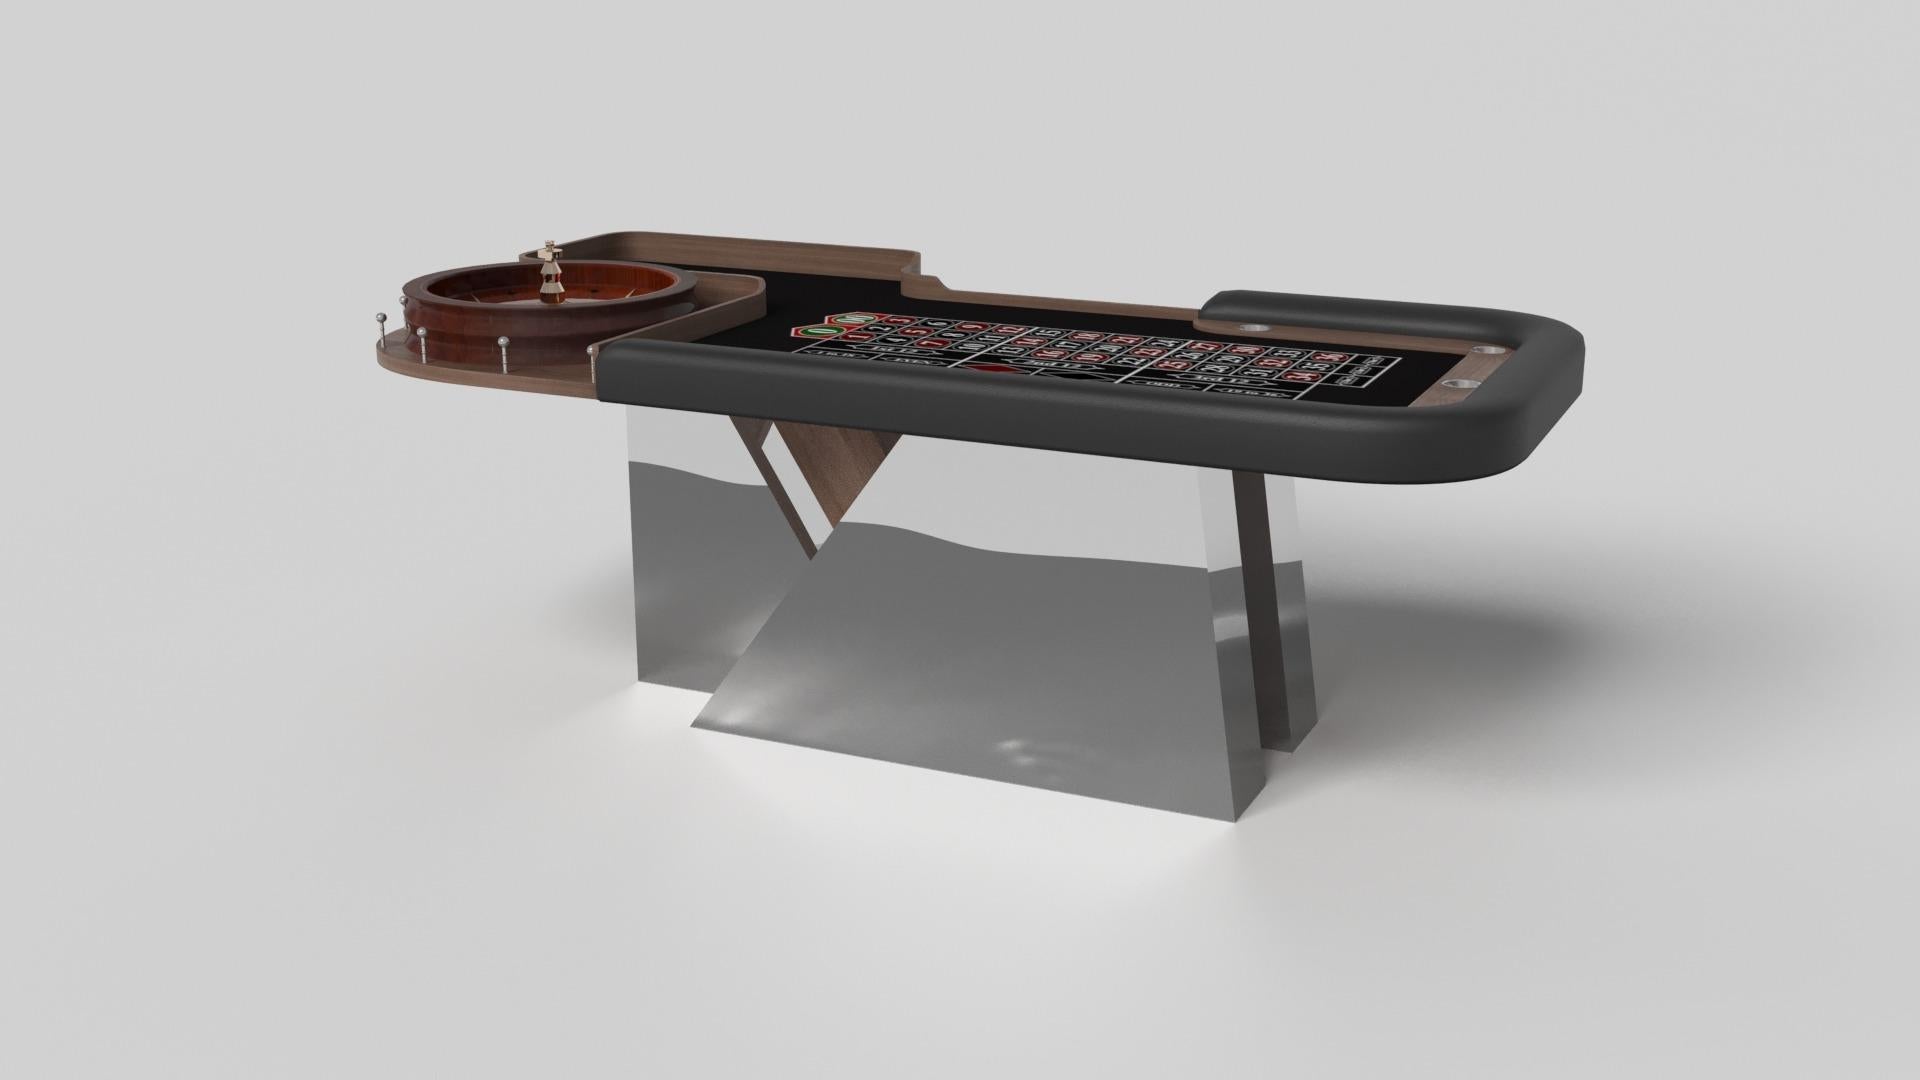 An asymmetric base creates a free-floating silhouette, making the Stilt roulette table in walnut a compelling, contemporary addition to the modern home. Detailed with bet blocks and an American wheel, this luxury handcrafted game table boasts an